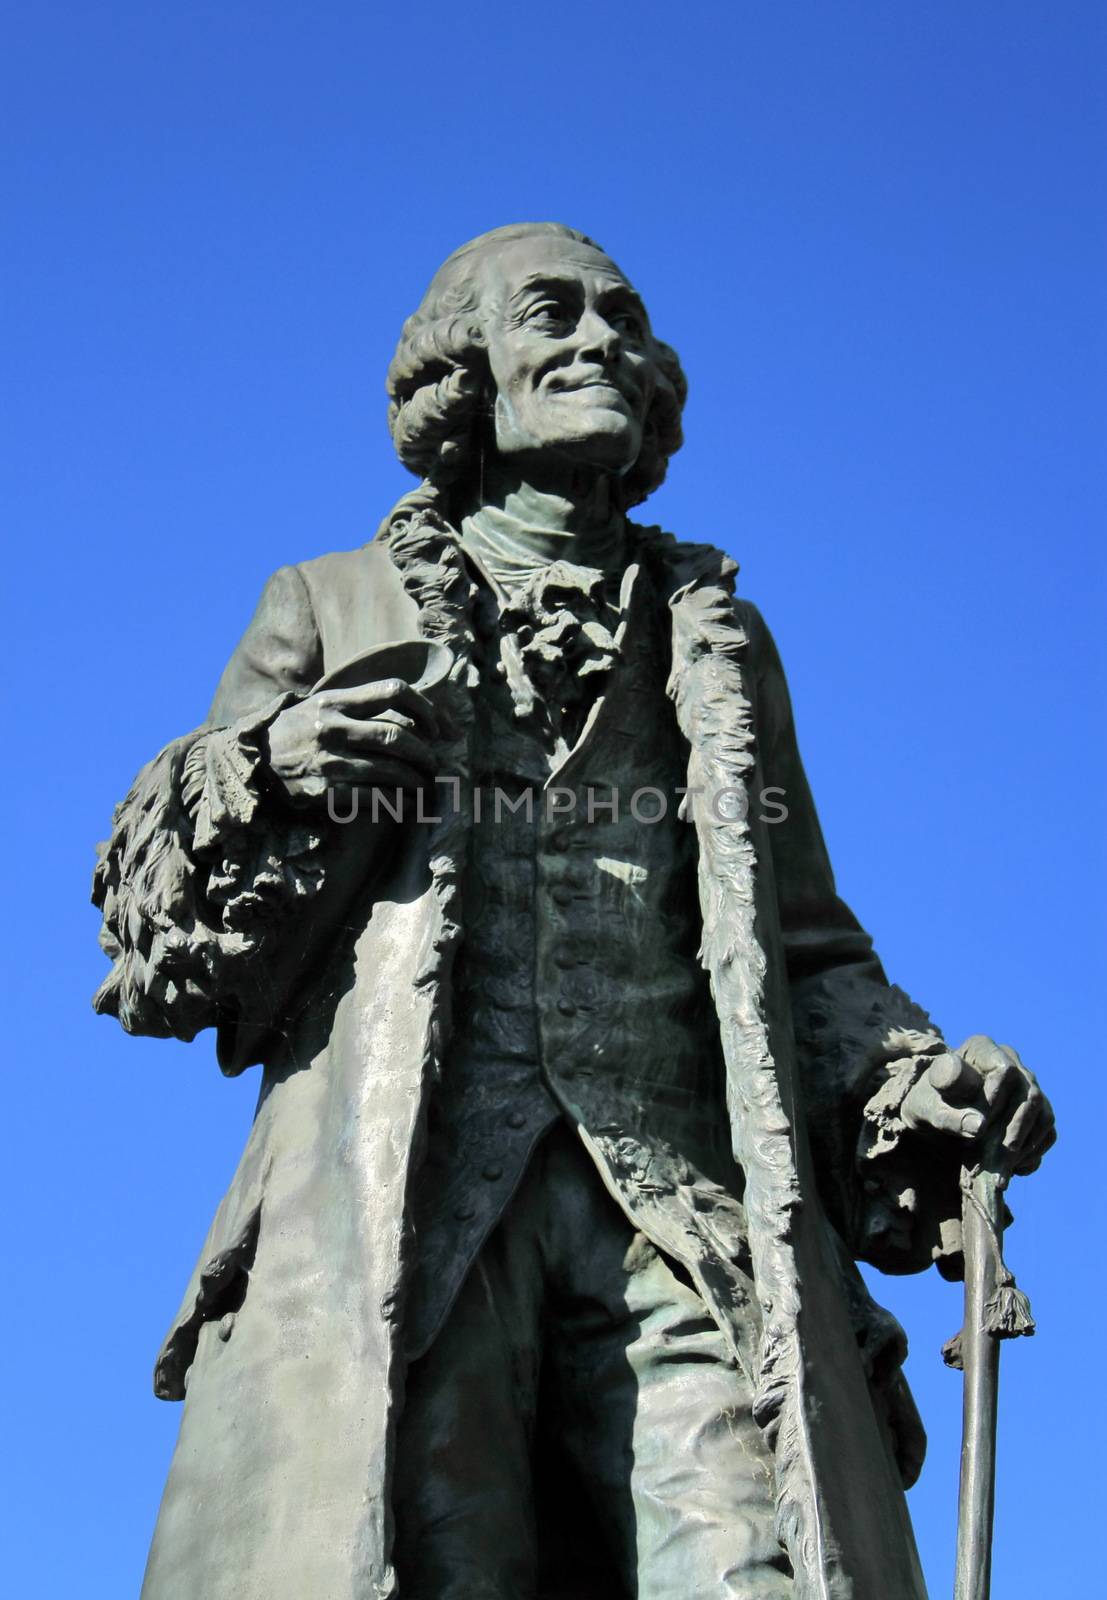 Statue of Voltaire, Ferney-Voltaire, France by Elenaphotos21